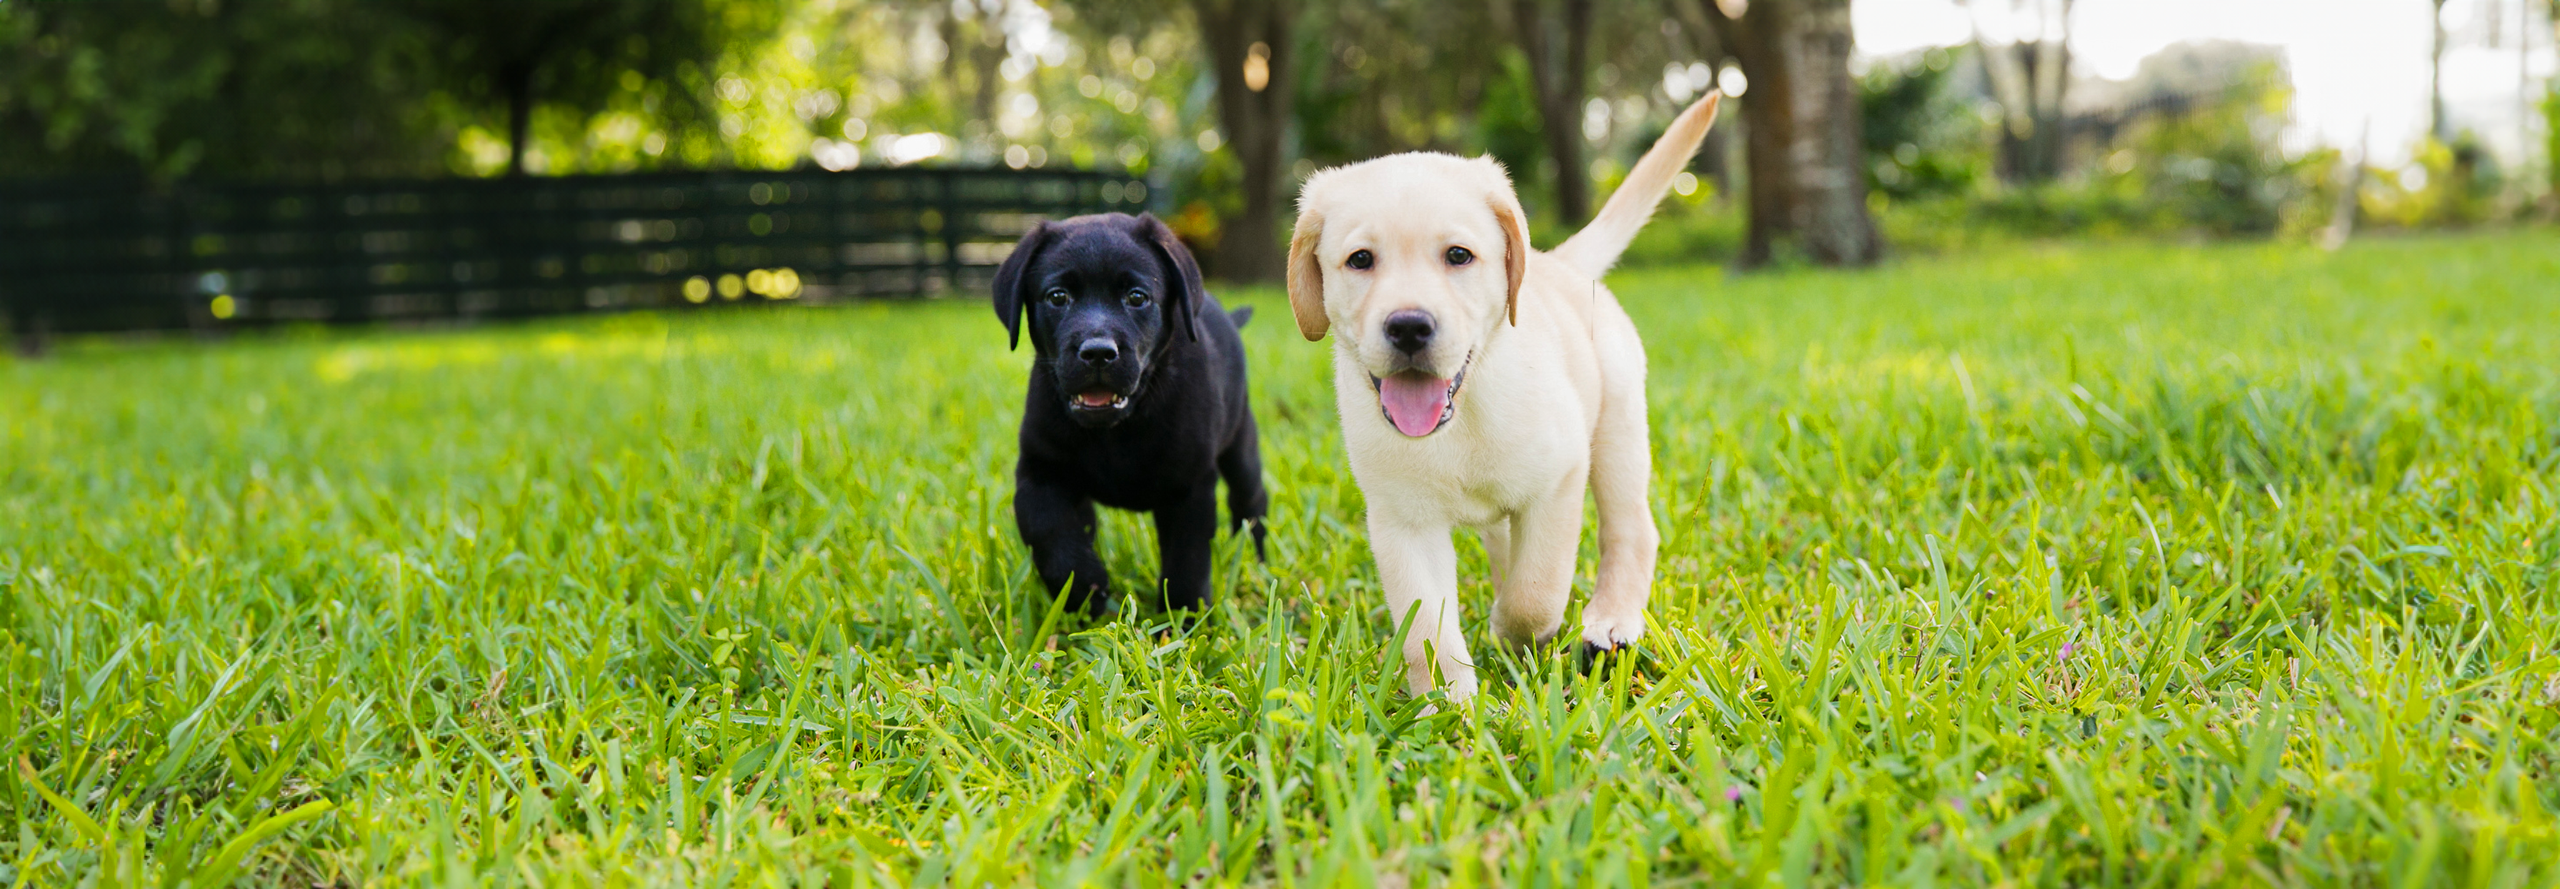 A yellow Labrador puppy and a black Labrador puppy walking in the grass outside.